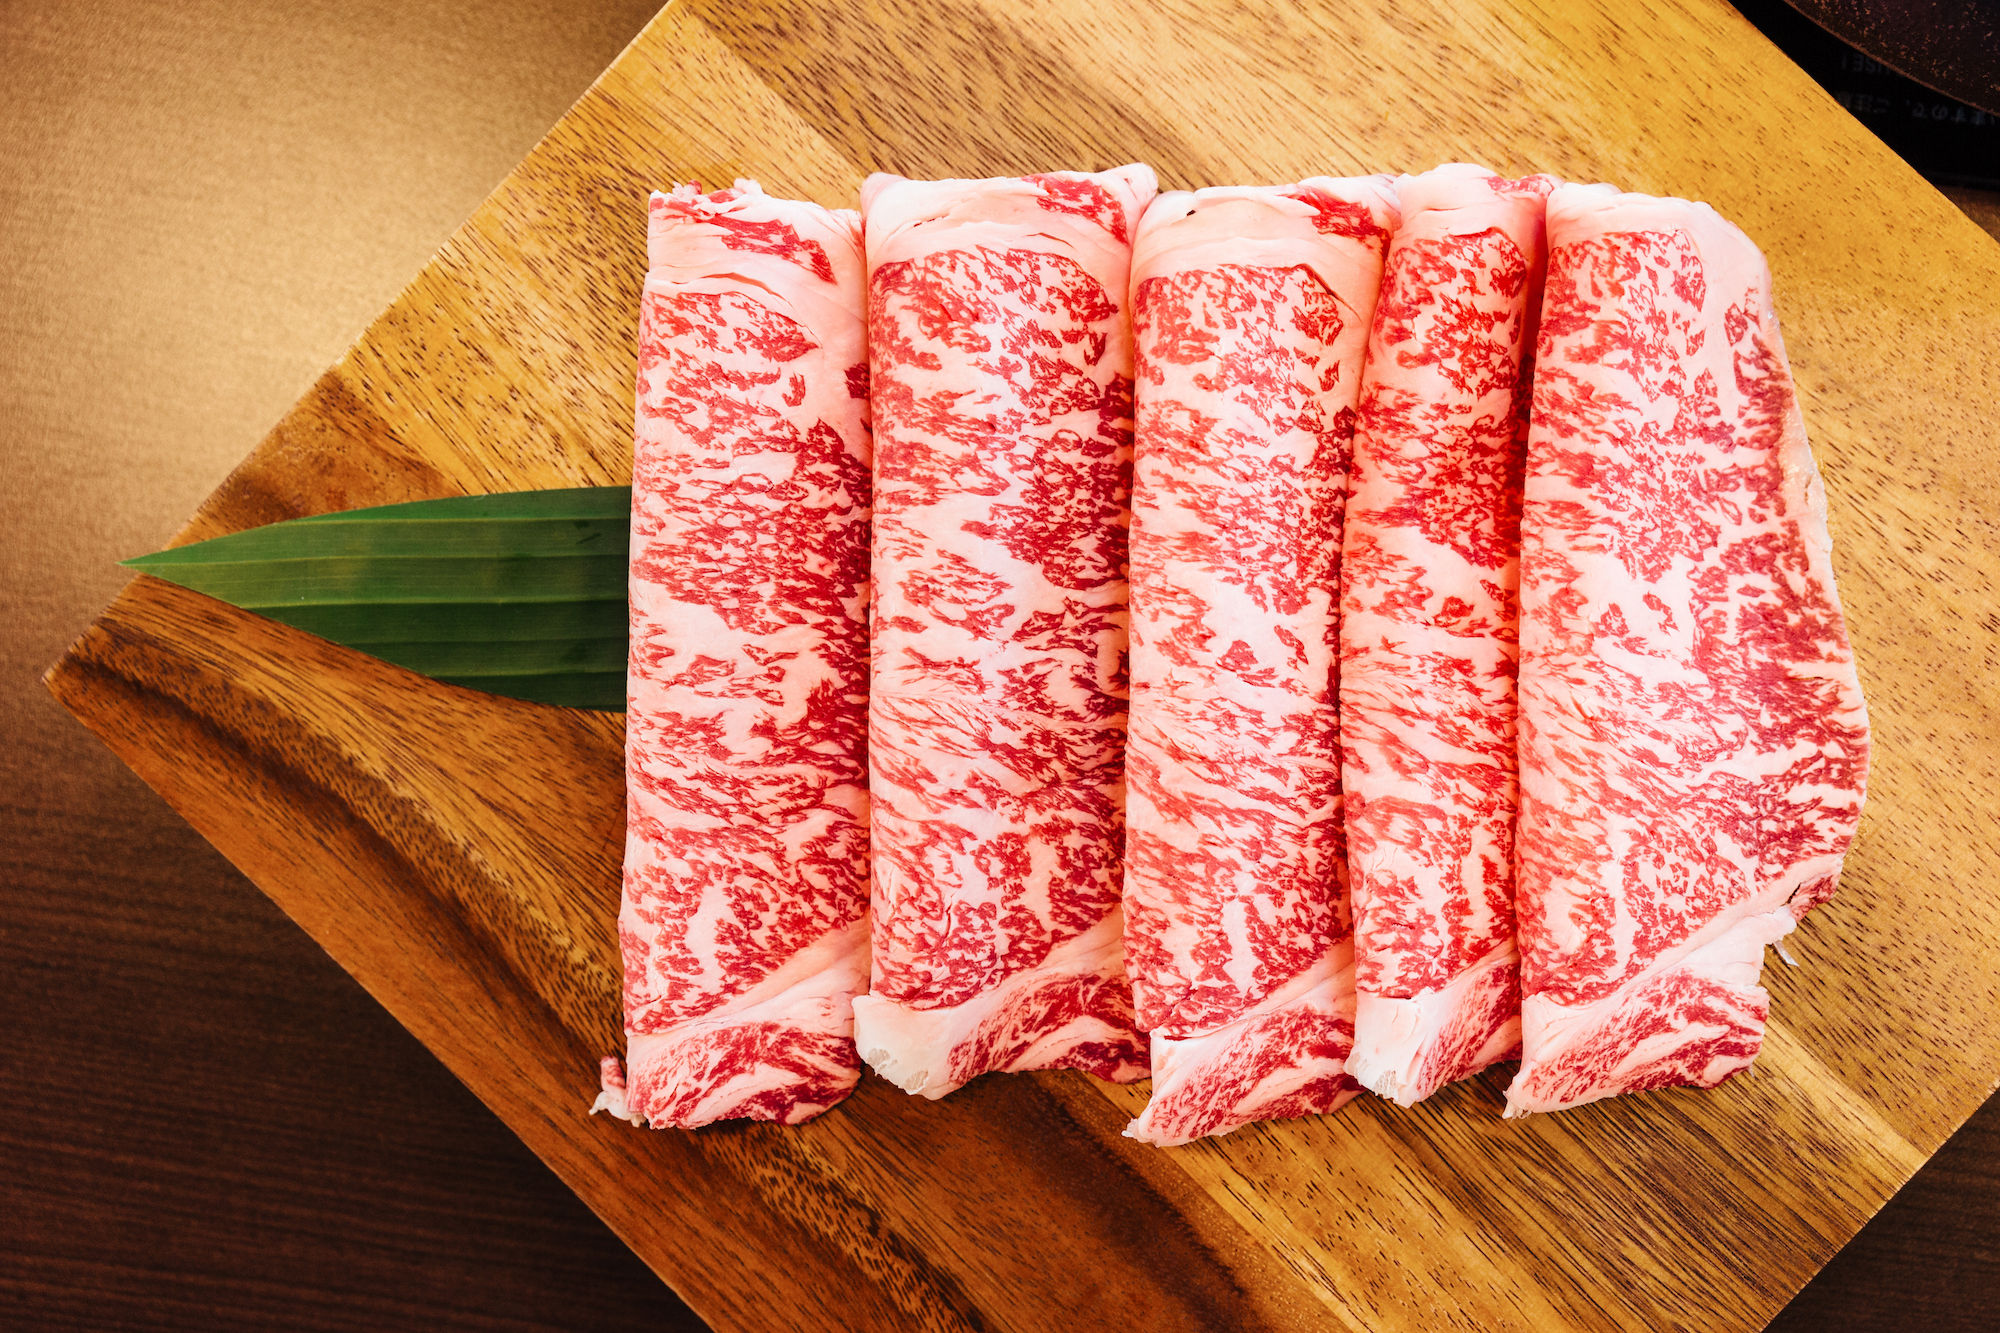 Premium wagyu beef delivered to your home!